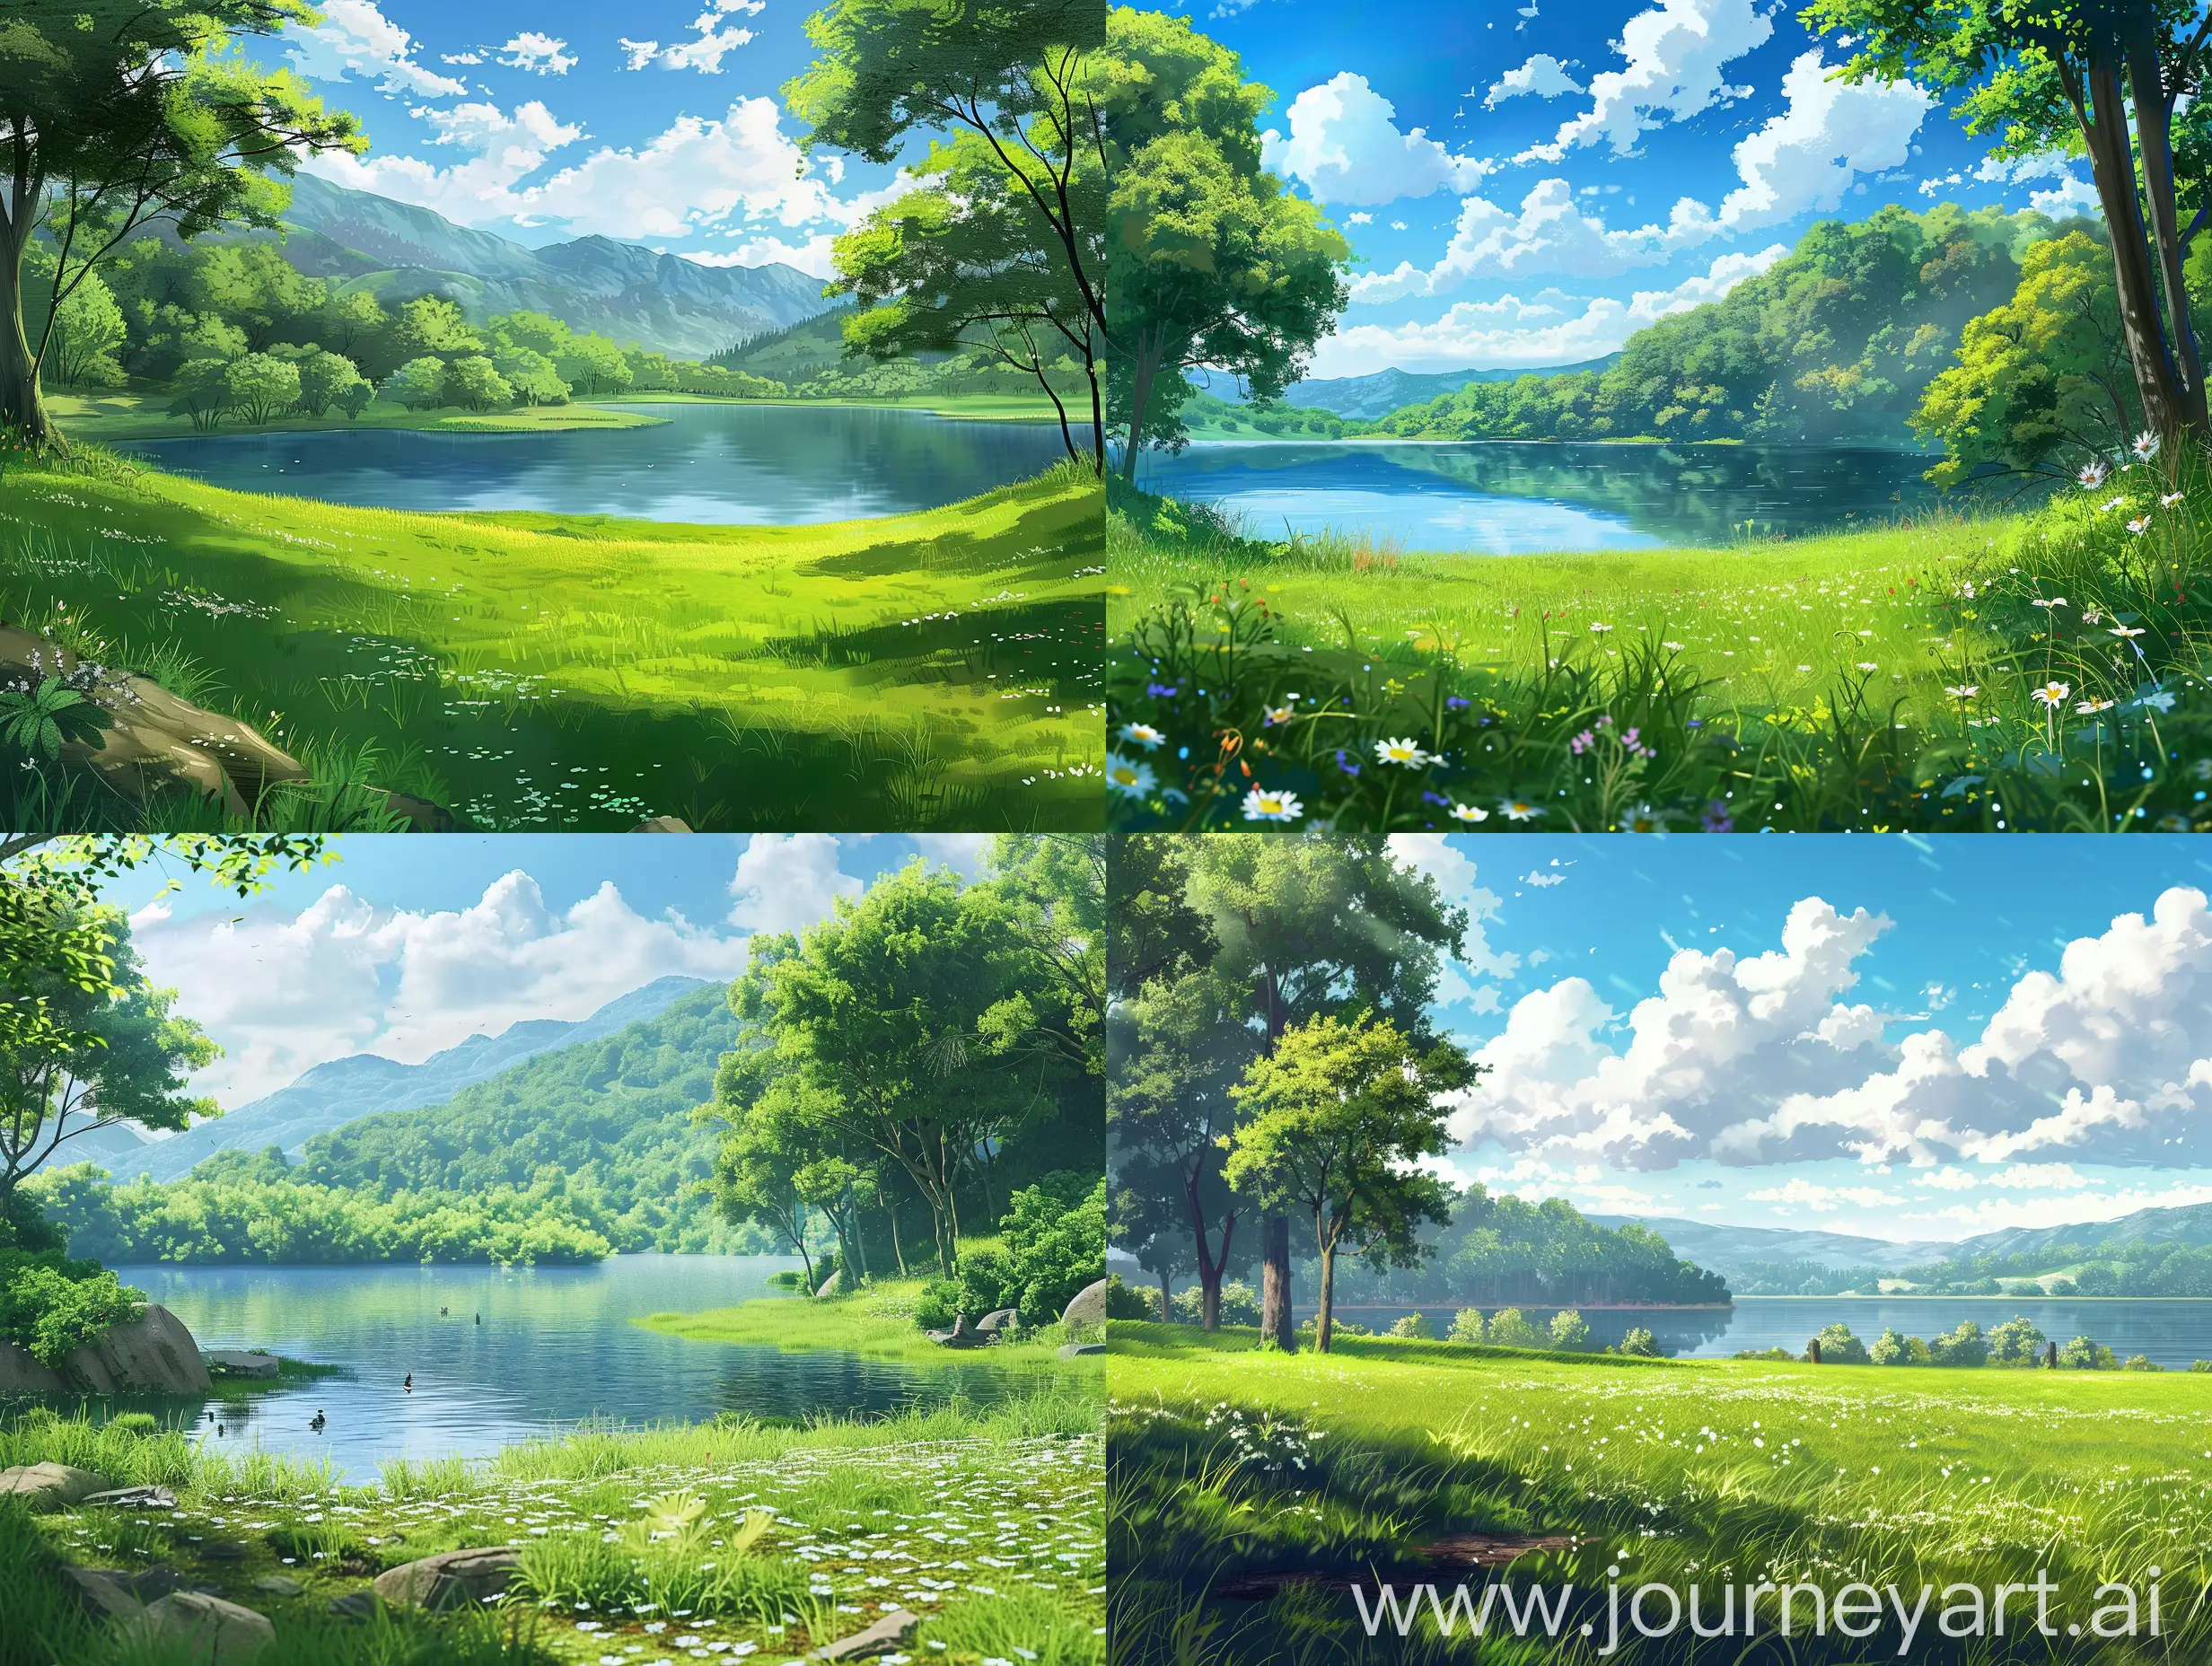 studio ghibli style of a peaceful grassy landscape with some trees and a lake. very detailed. --s 1000